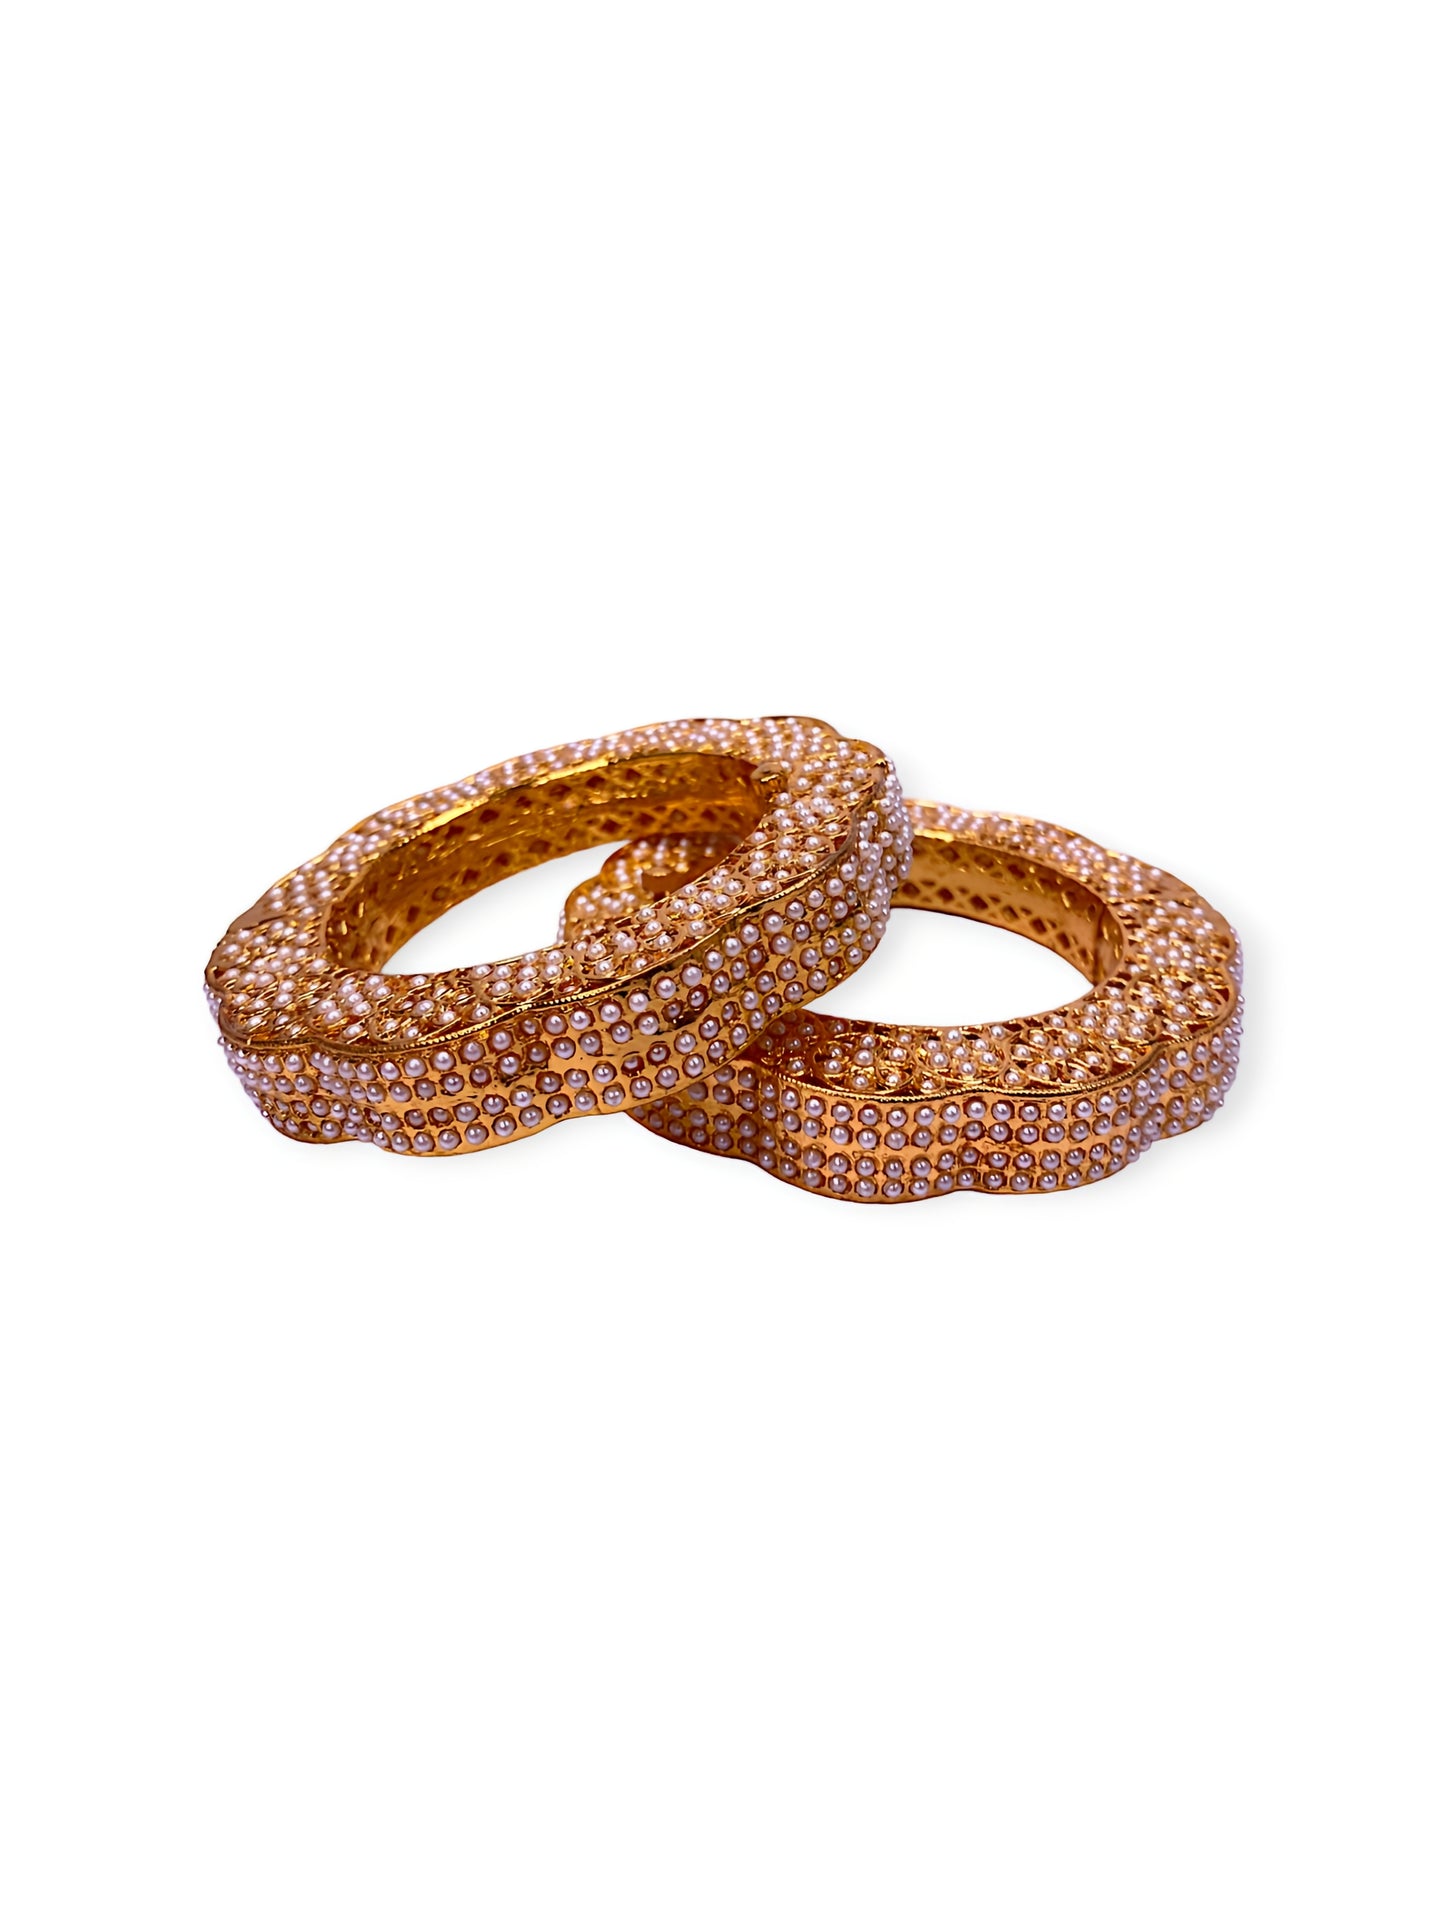 Gold Plated Rajwada Style Bangles with Pearls